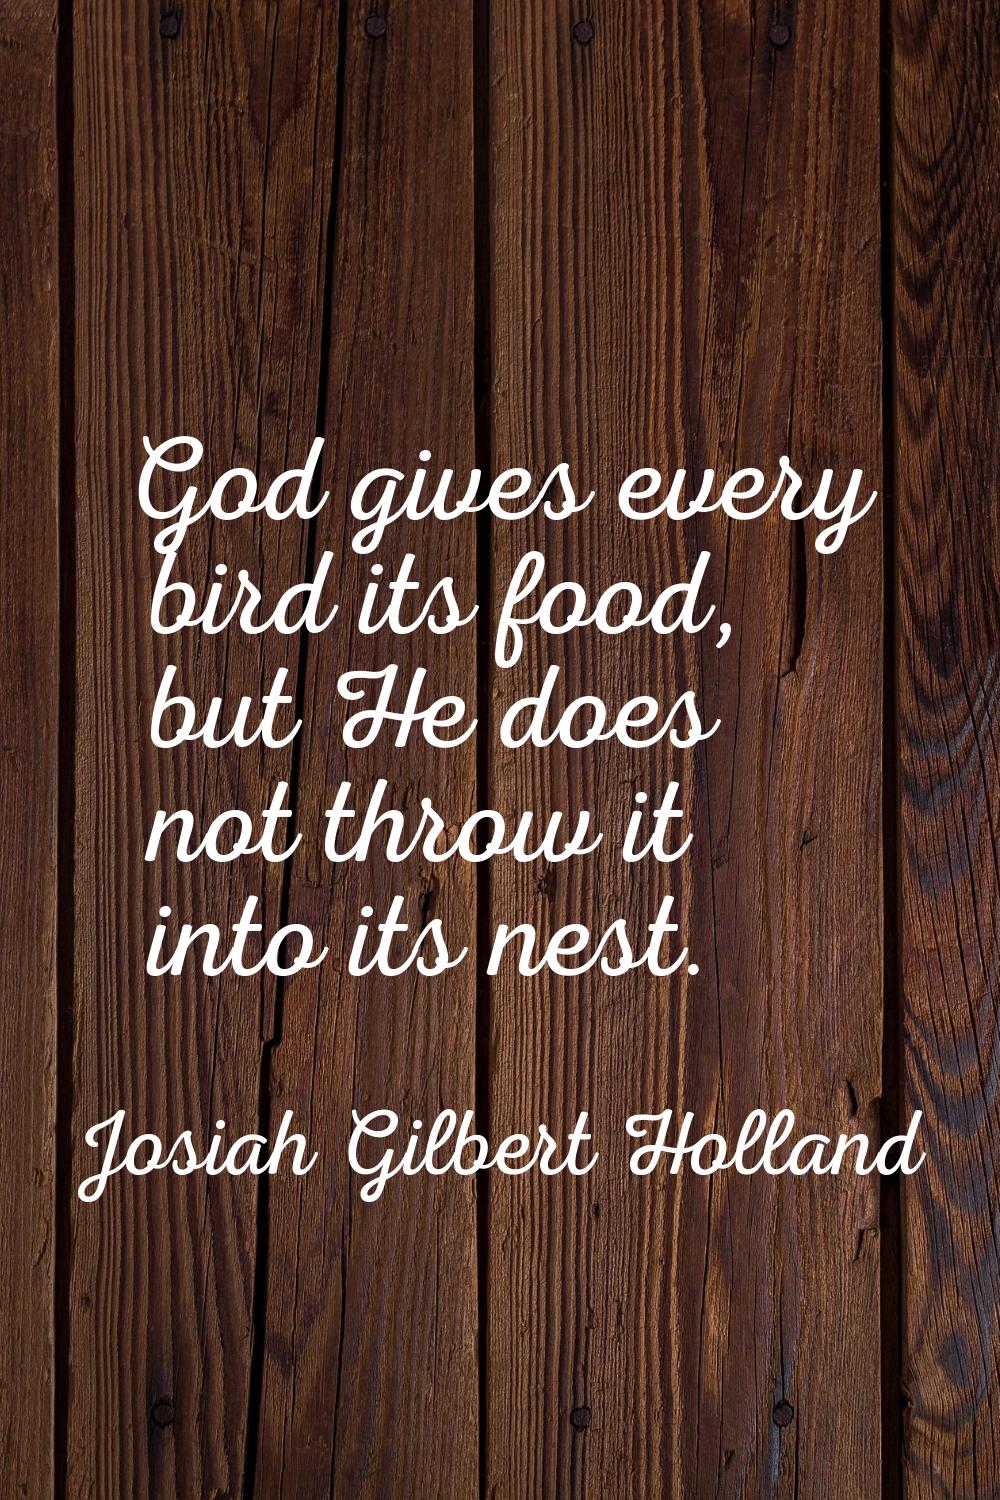 God gives every bird its food, but He does not throw it into its nest.